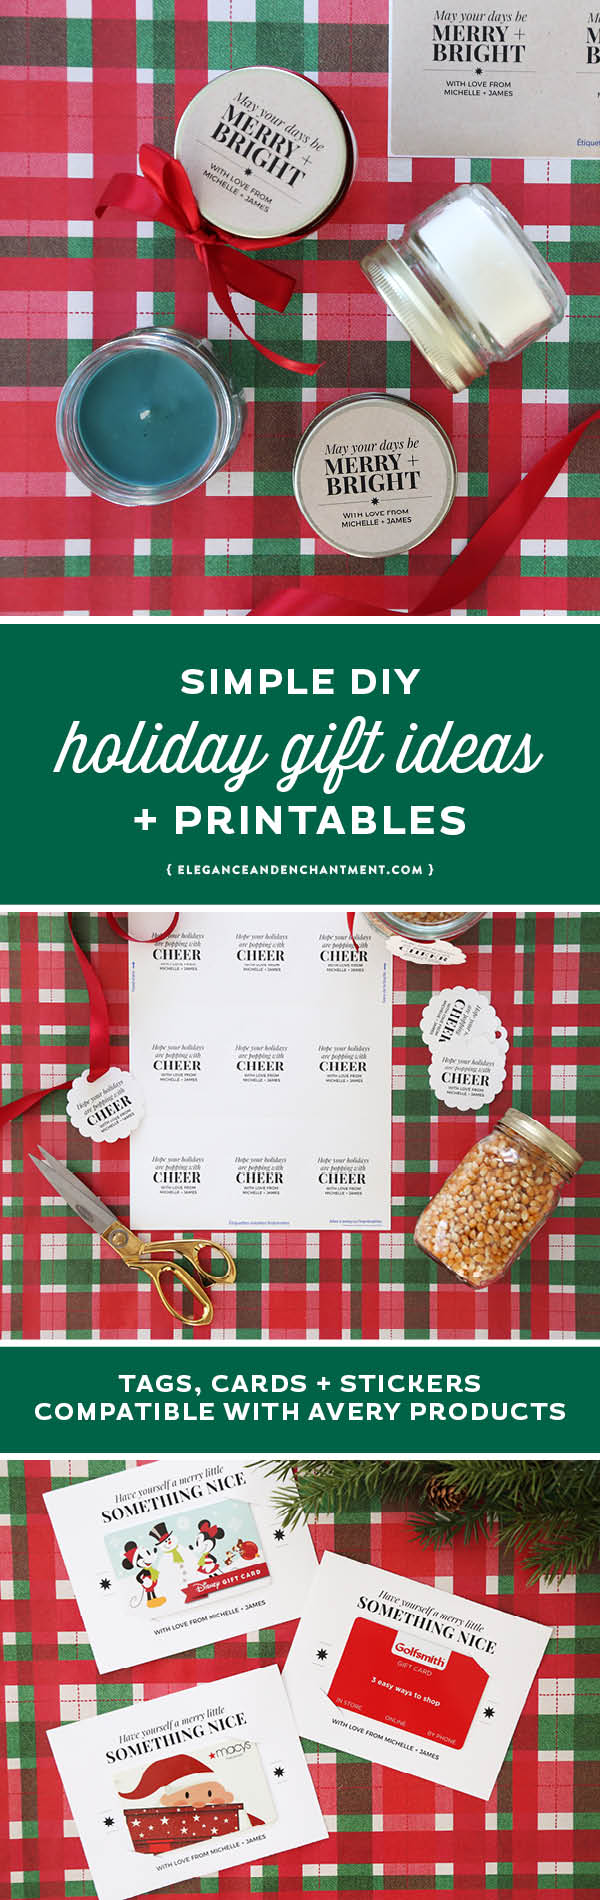 Keep your holiday gift giving simple and elegant with this collection of free printables: stickers, cards and gift tags, all compatible with Avery products for easy printing and assembly. // Designs from Elegance and Enchantment